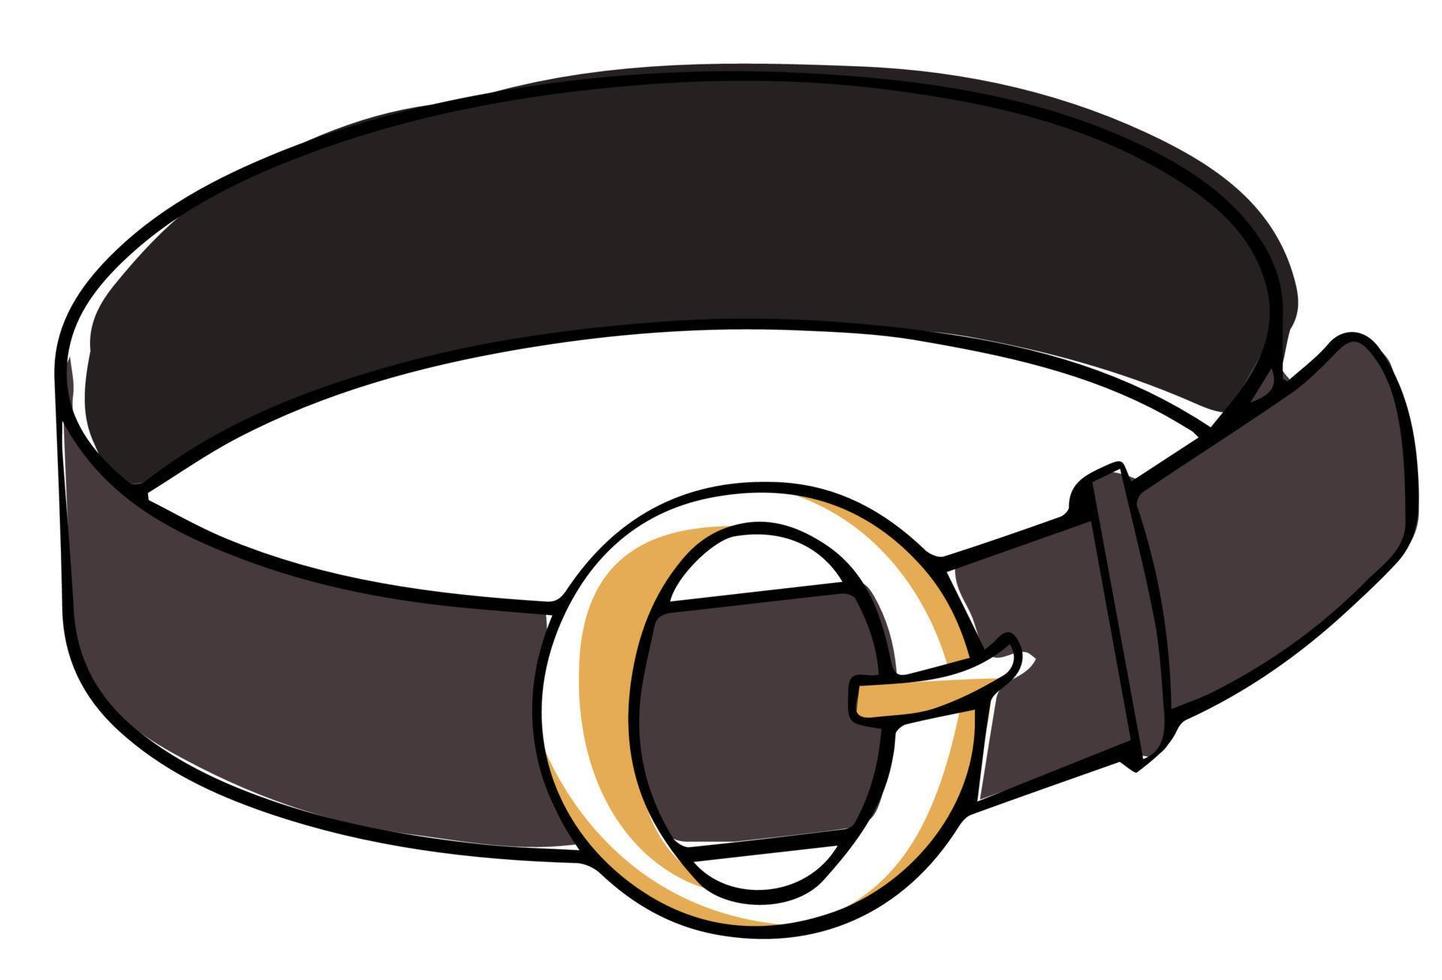 Leather belt with golden clasp, modern accessories vector